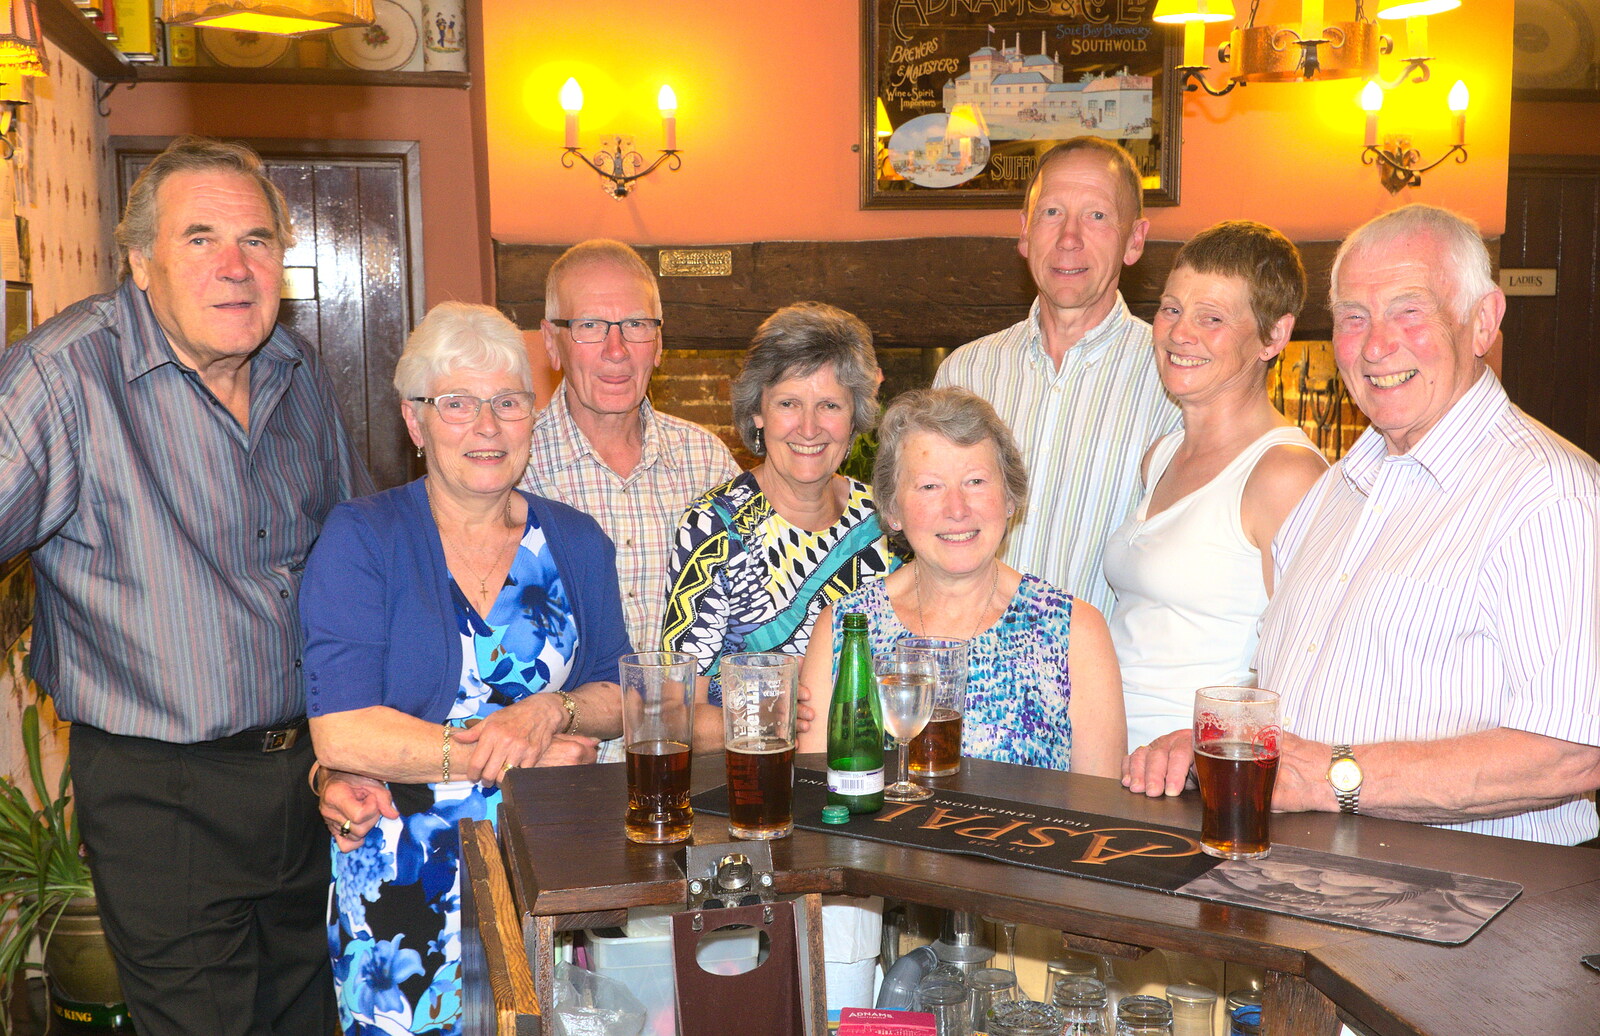 The 'Saga' group from A Retirement: The Last Night of The Swan Inn, Brome, Suffolk - 3rd June 2017